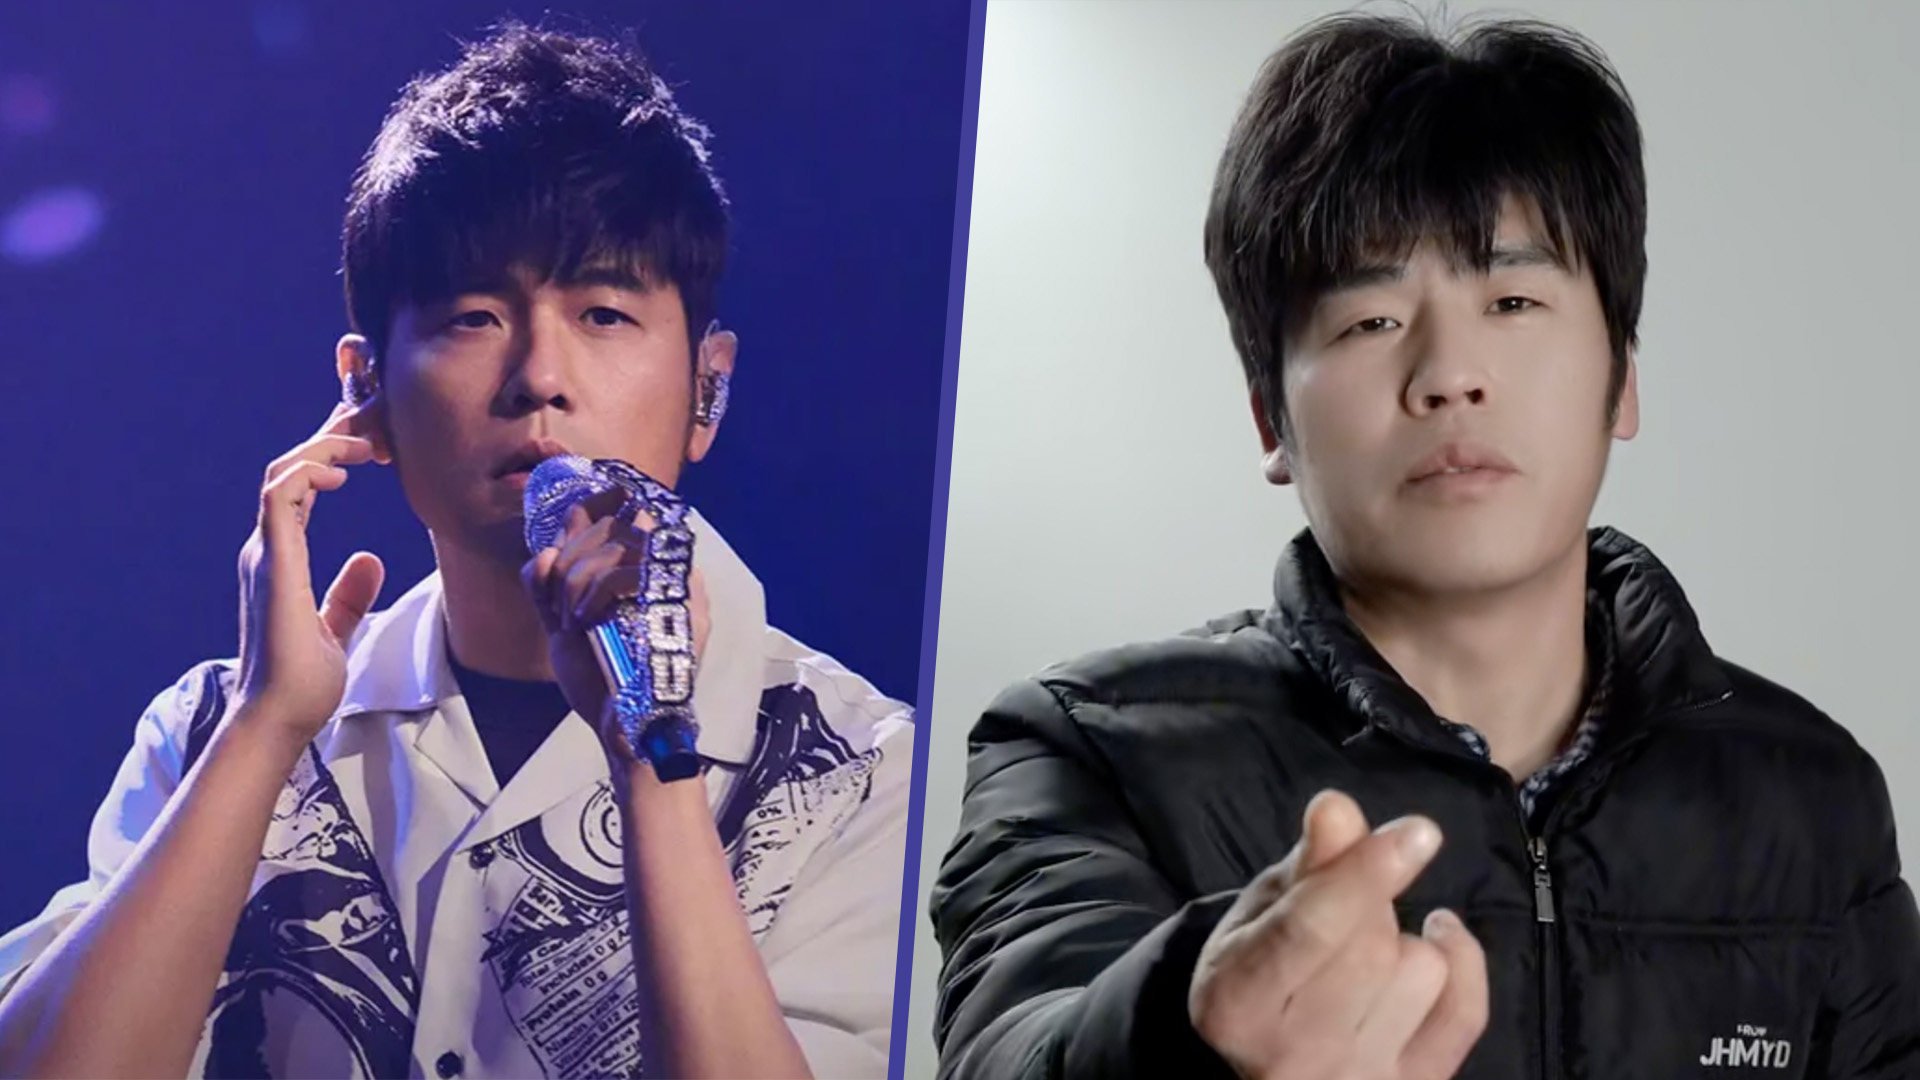 A street vendor in China who bears an uncanny resemblance to Taiwanese pop singer, Jay Chou, has become an online sensation, with 3 million followers. Photo: SCMP composite/Douyin